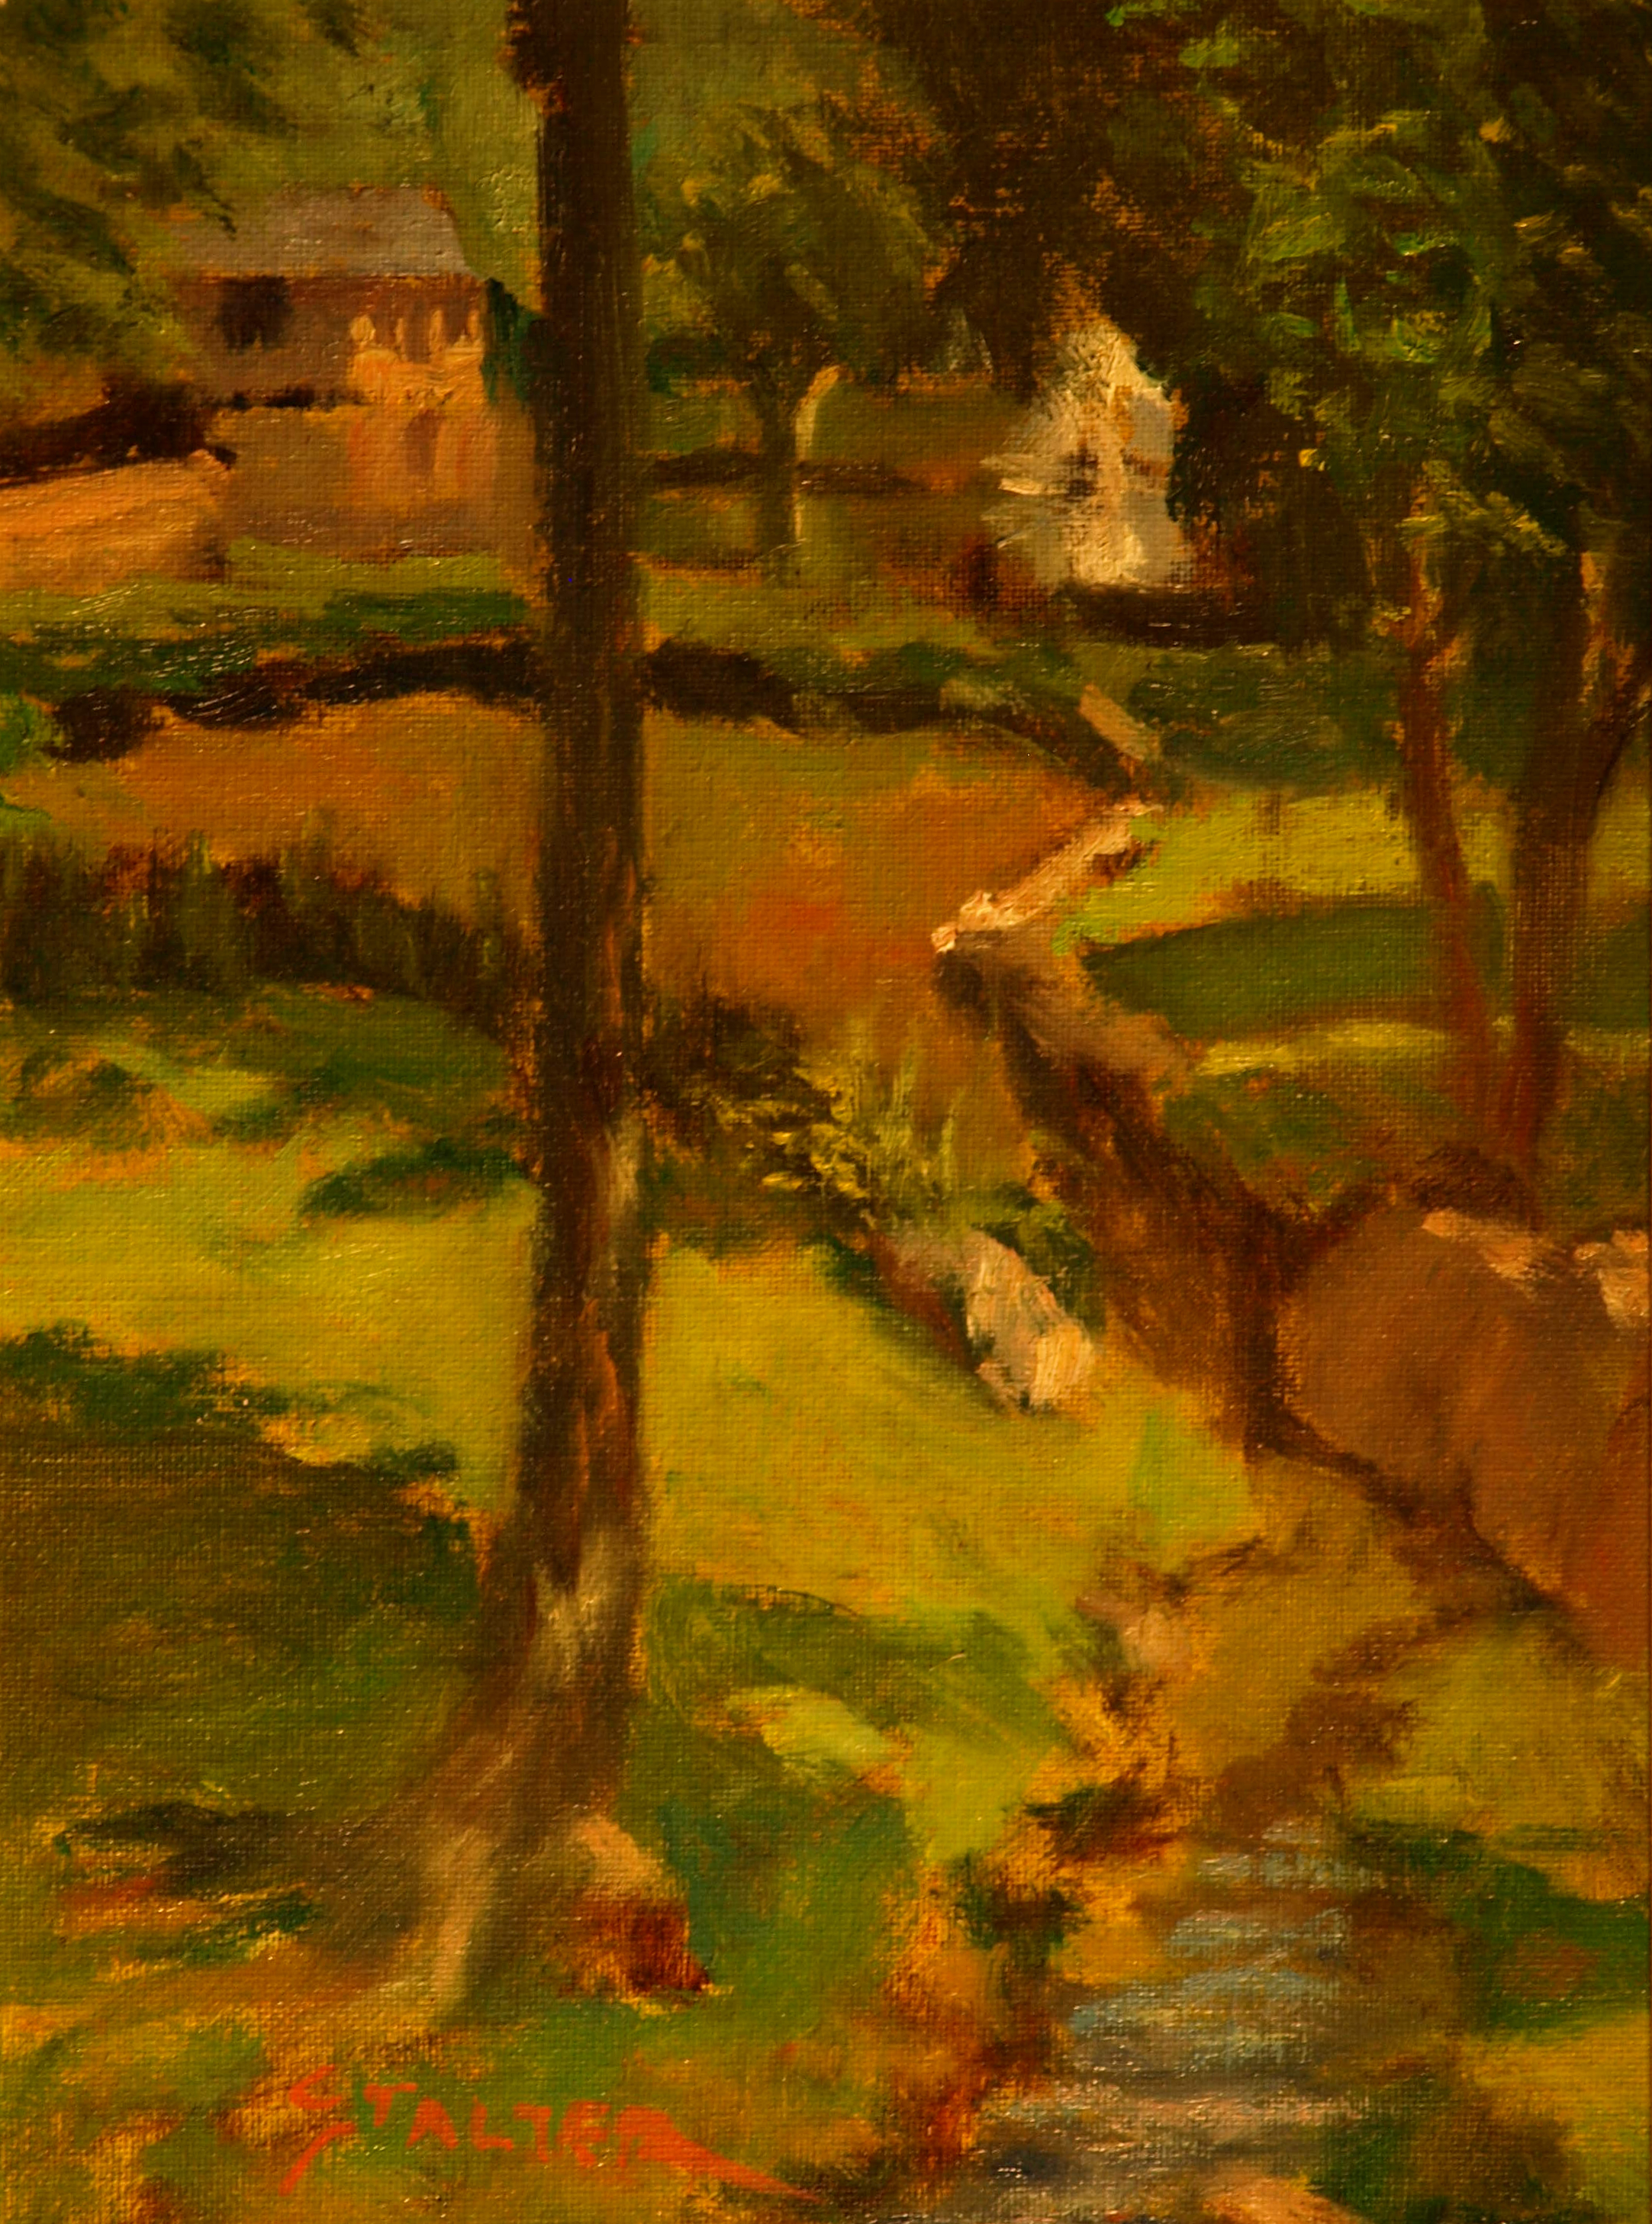 Fountain at Tilley Pond, Oil on Canvas on Panel, 12 x 9 Inches, by Richard Stalter, $225